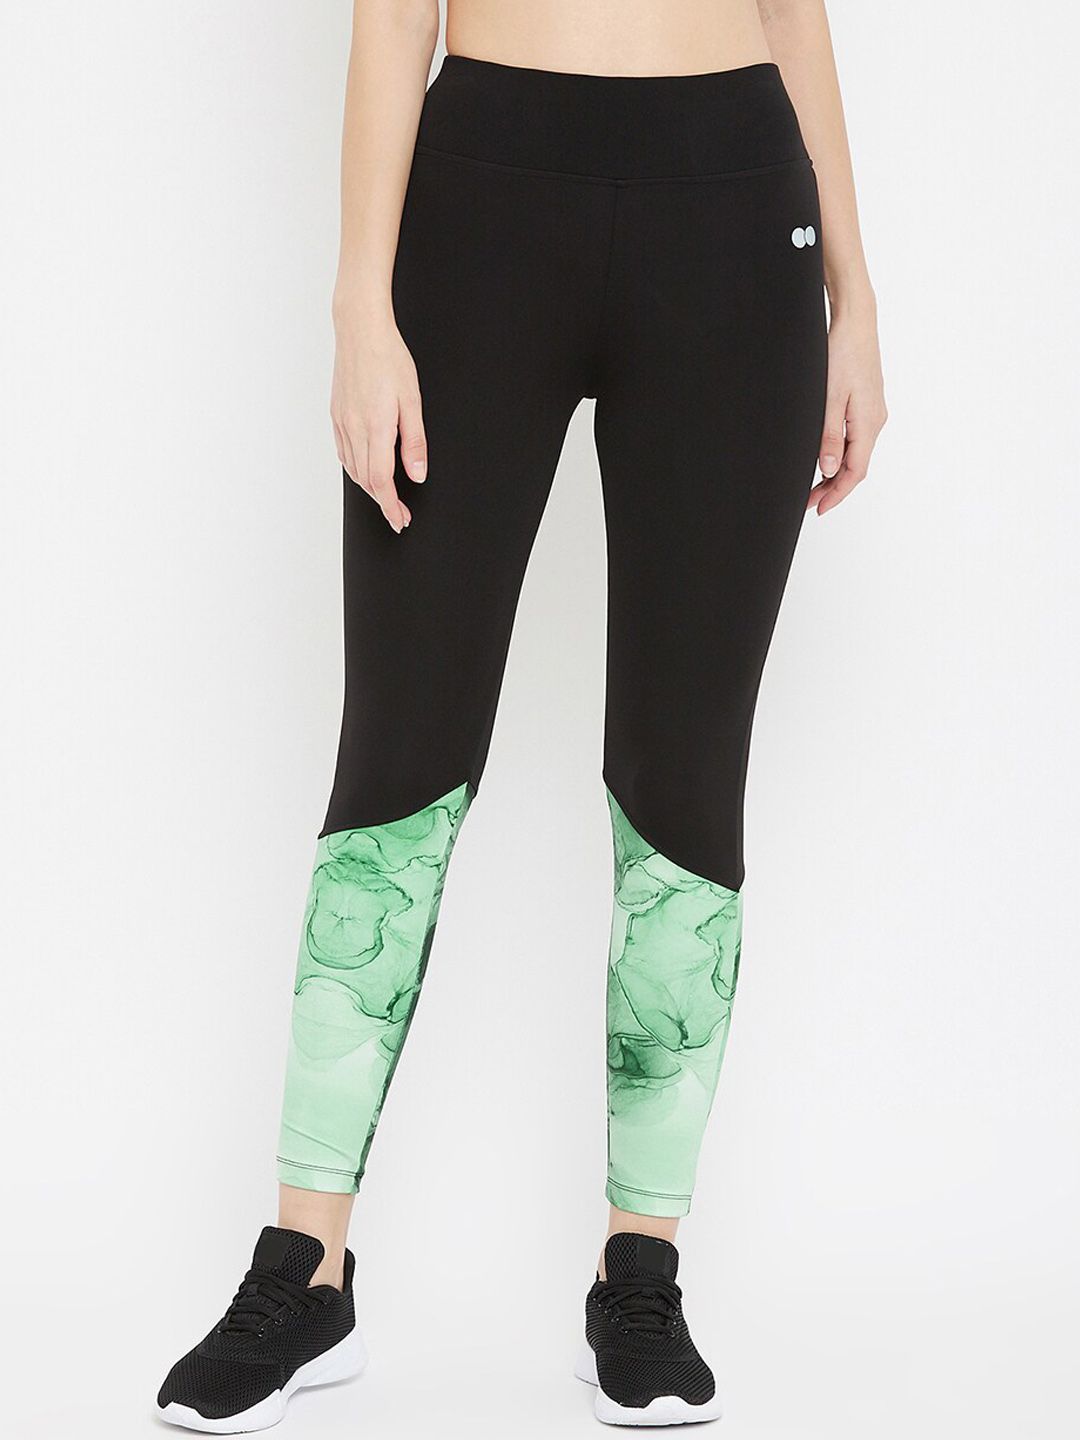 Clovia Women Black & Green Printed Active Ankle-Length Tights Price in India